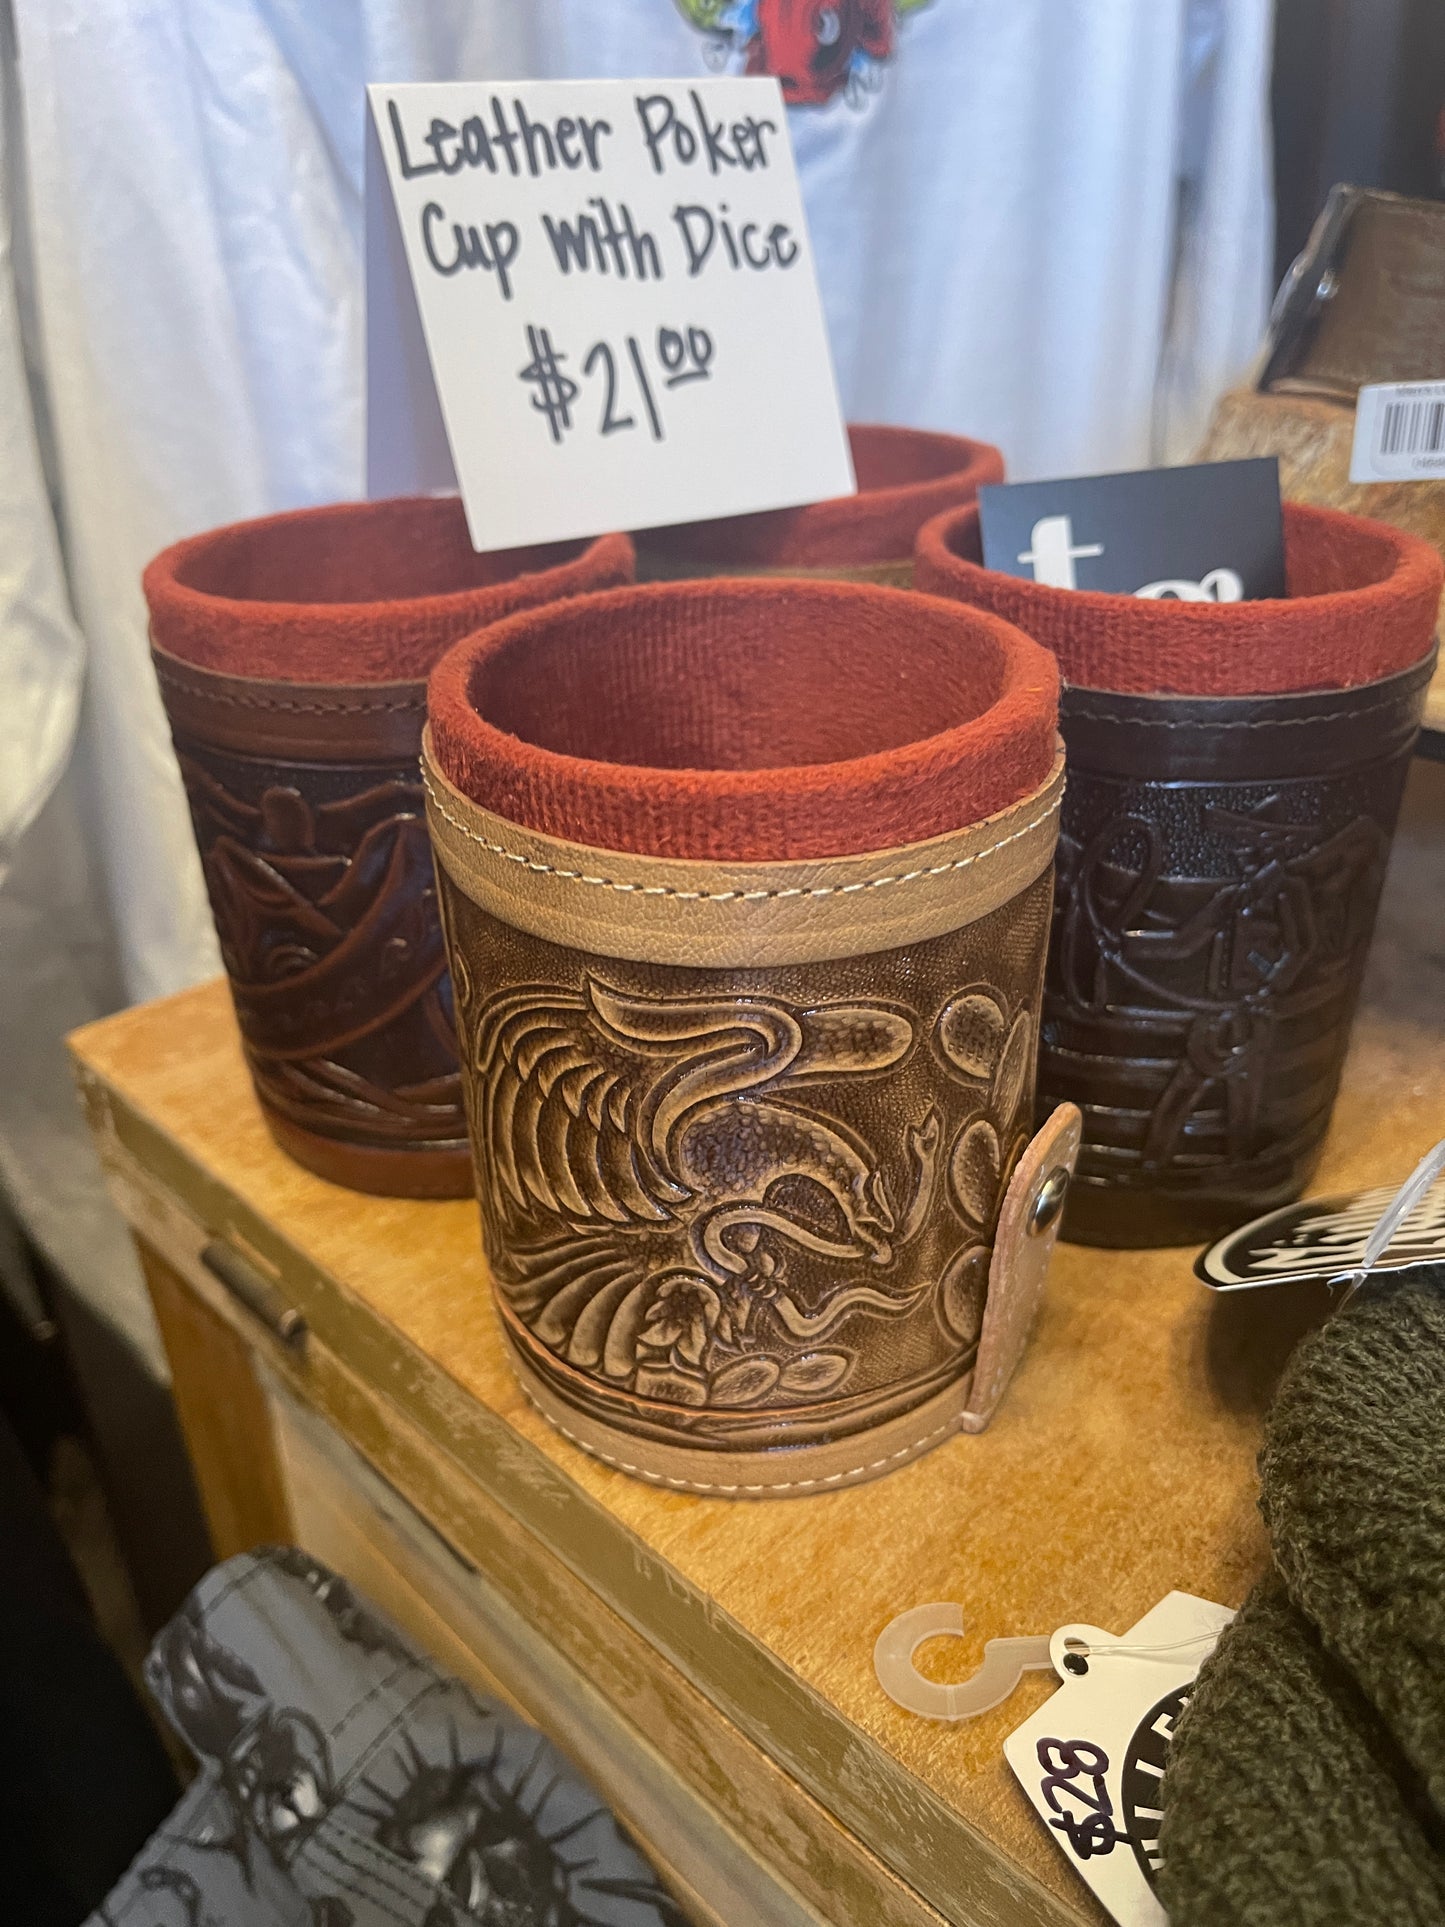 Leather Cup